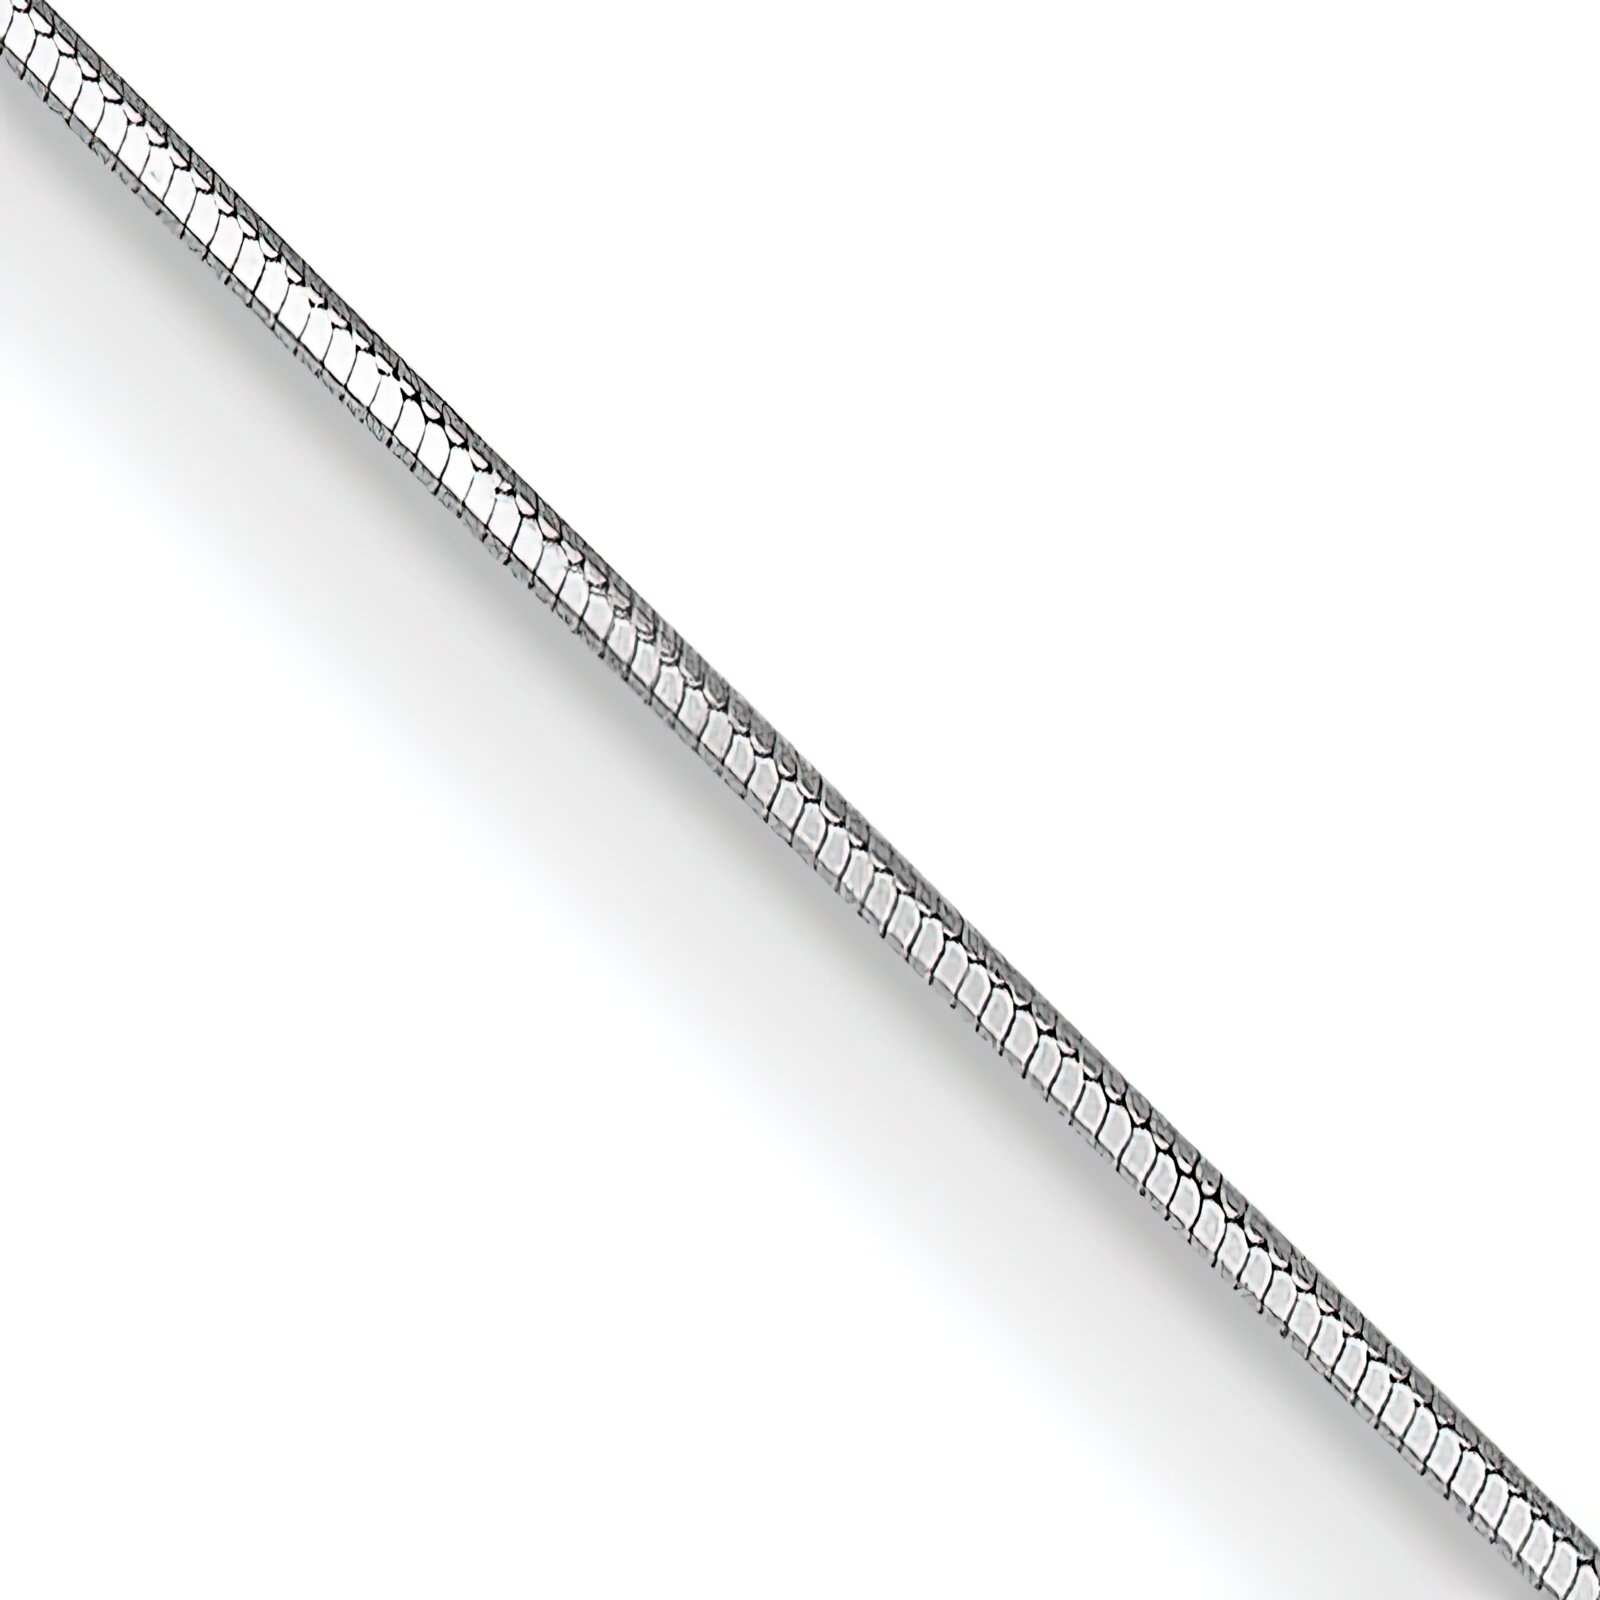 Findingking 14K White Gold .7mm Octagonal Snake Chain Jewelry 30"